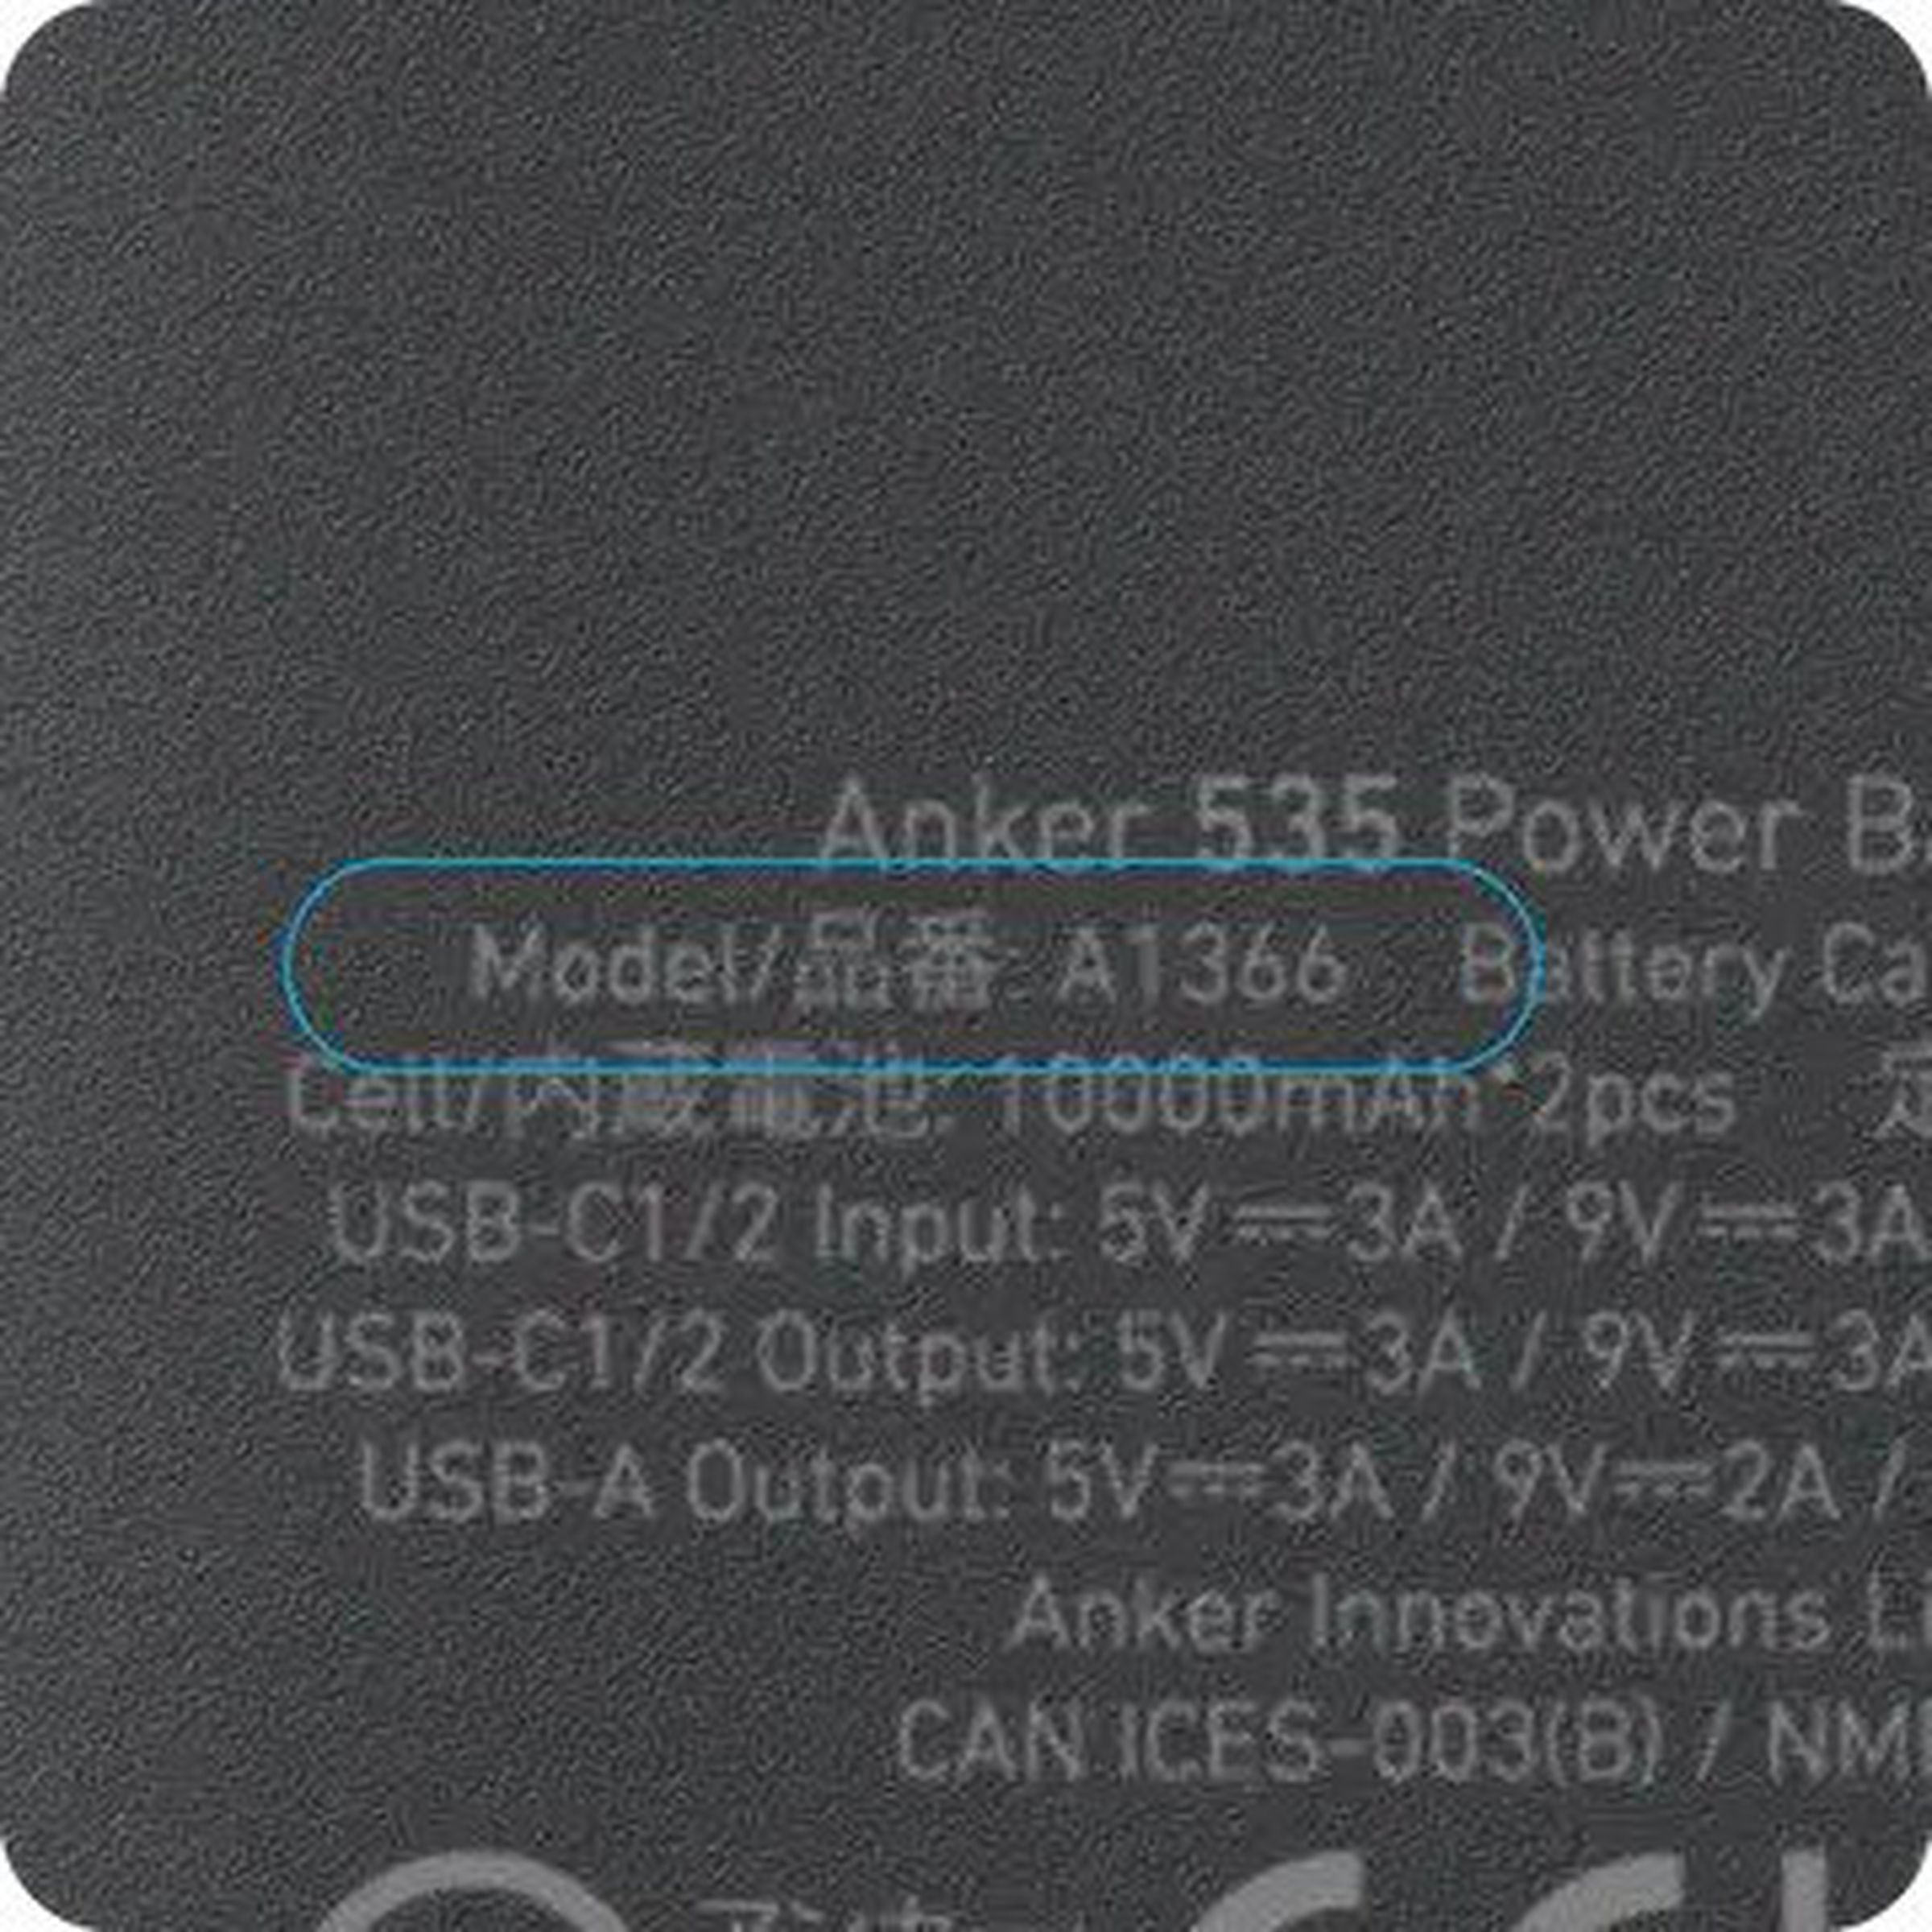 A close-up shot of the back of an Anker 535 Power Bank displaying the A1366 model number.